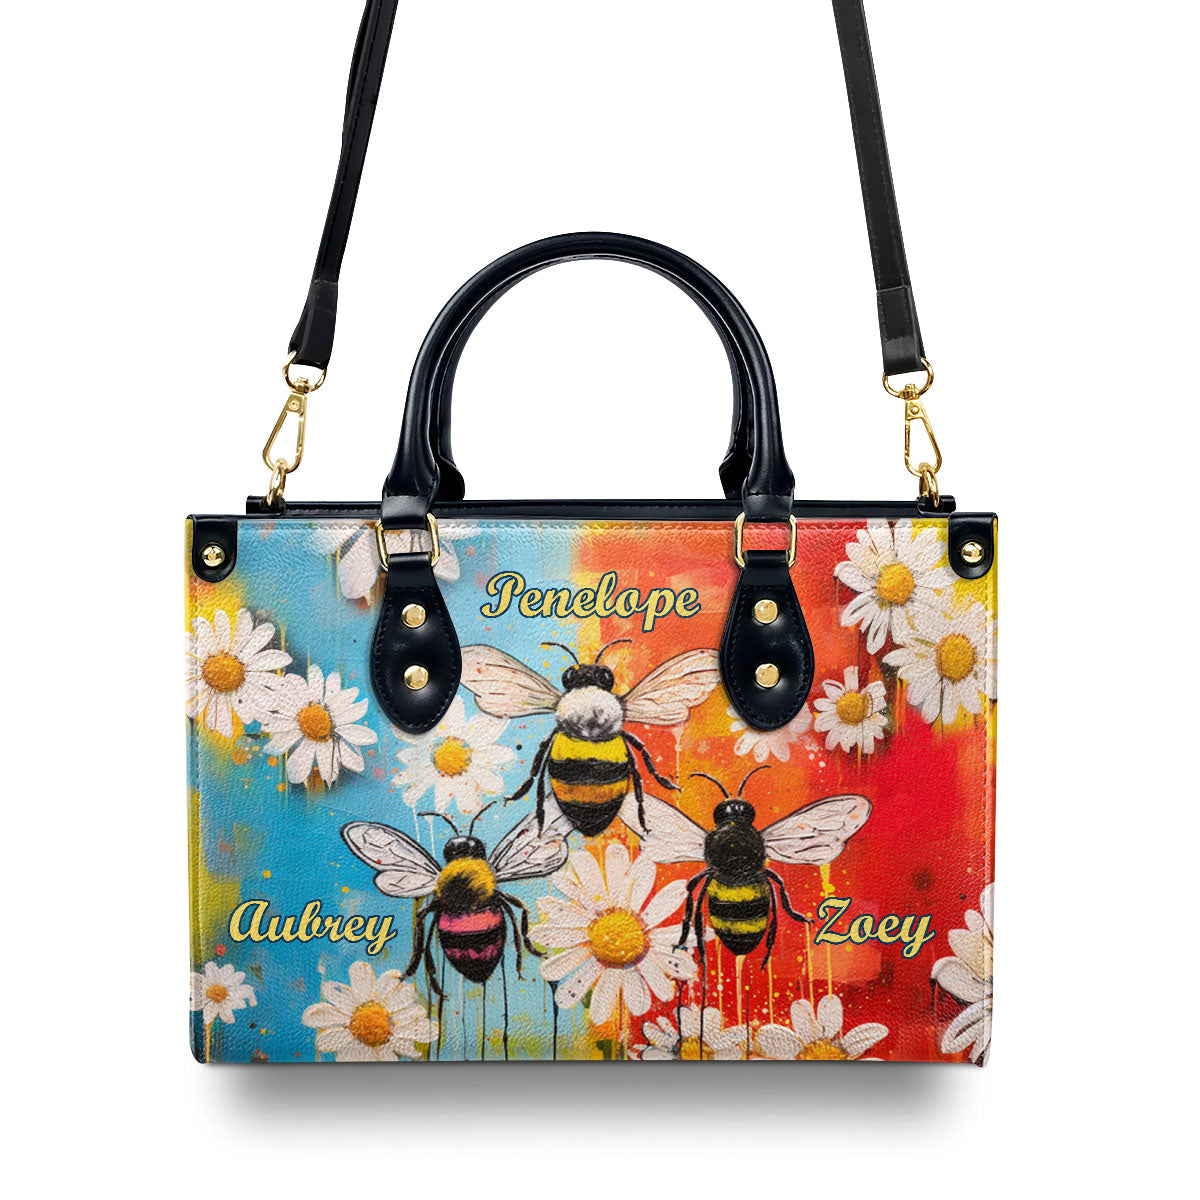 3 Bees - Personalized Leather Handbag MS-NH1631